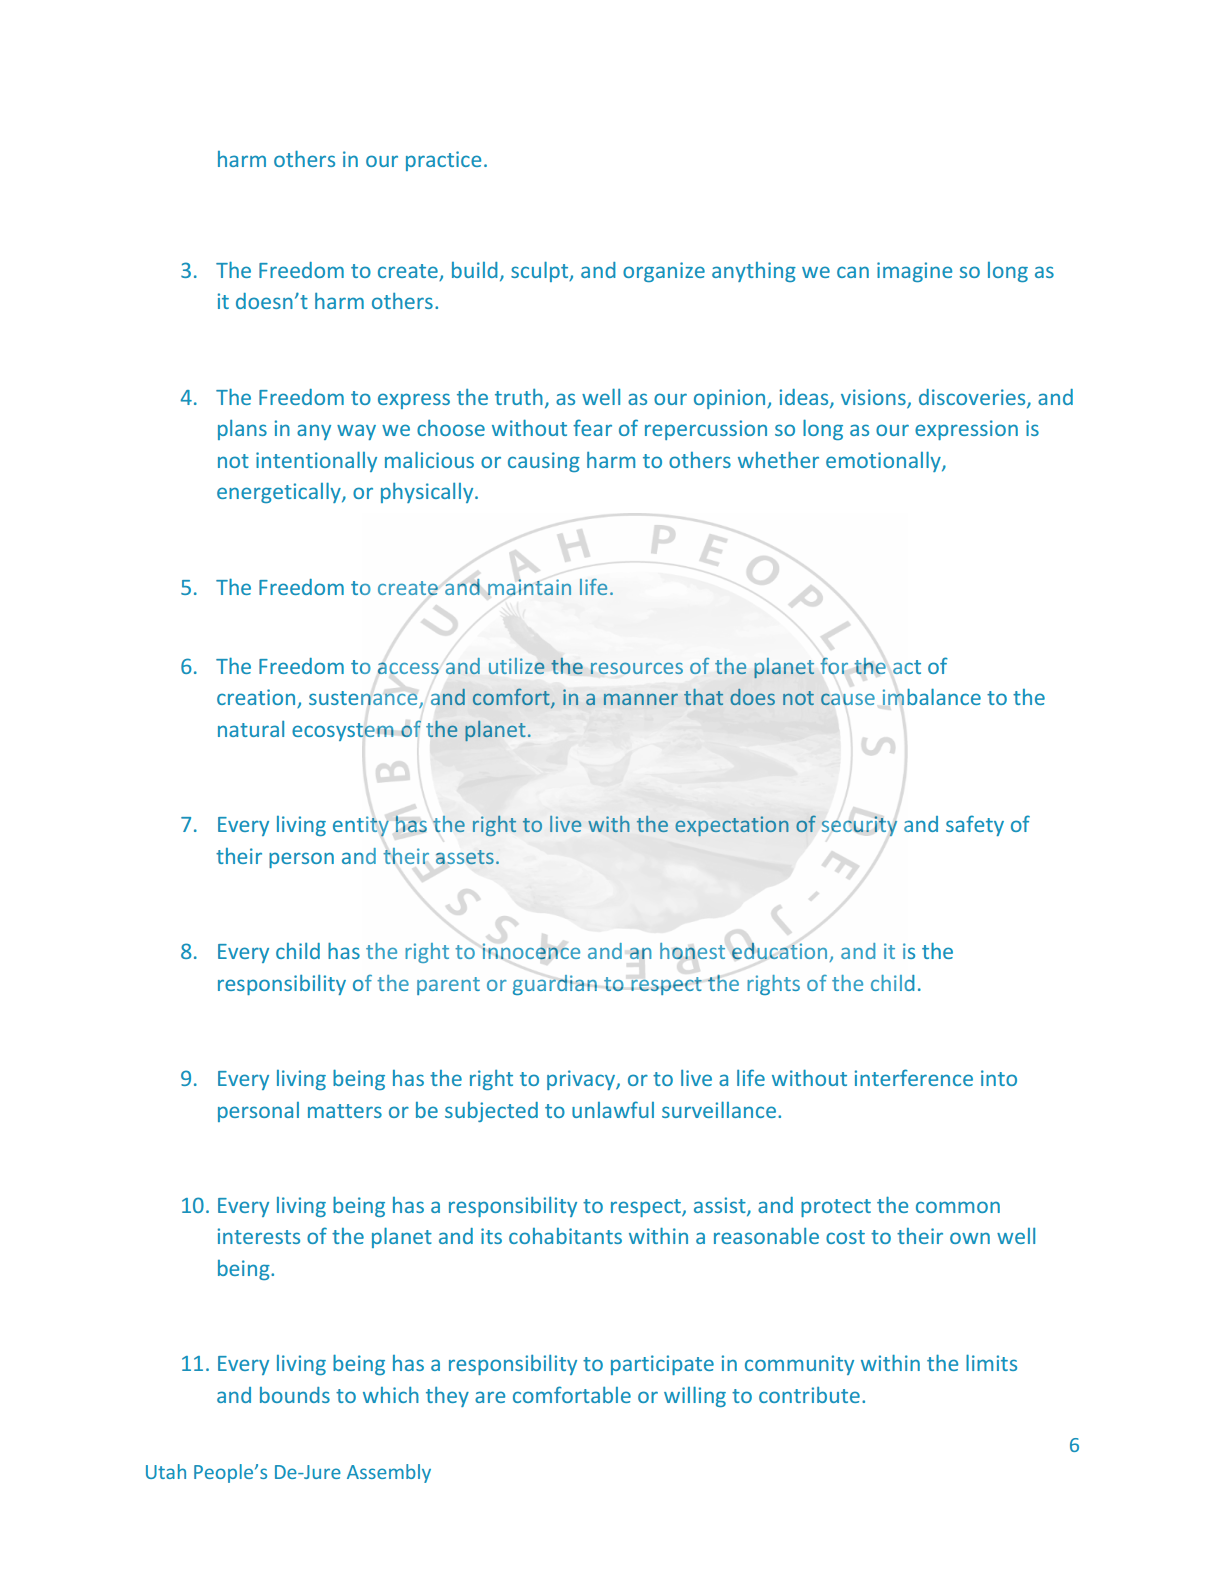 New Declaration of Independencepng_Page6